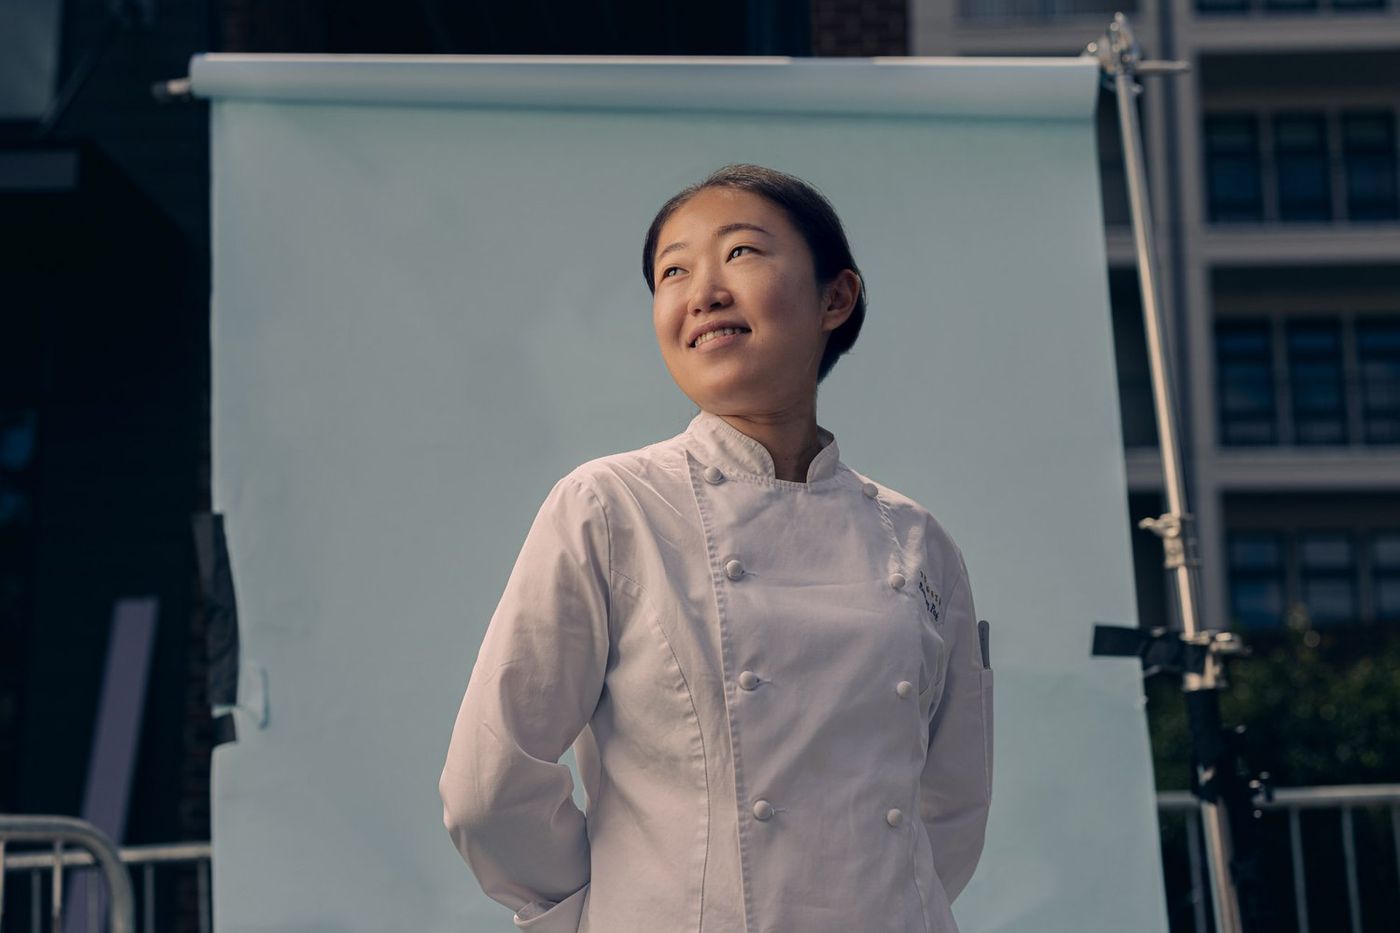 Suyoung Park, Michelin Young Chef Awardee